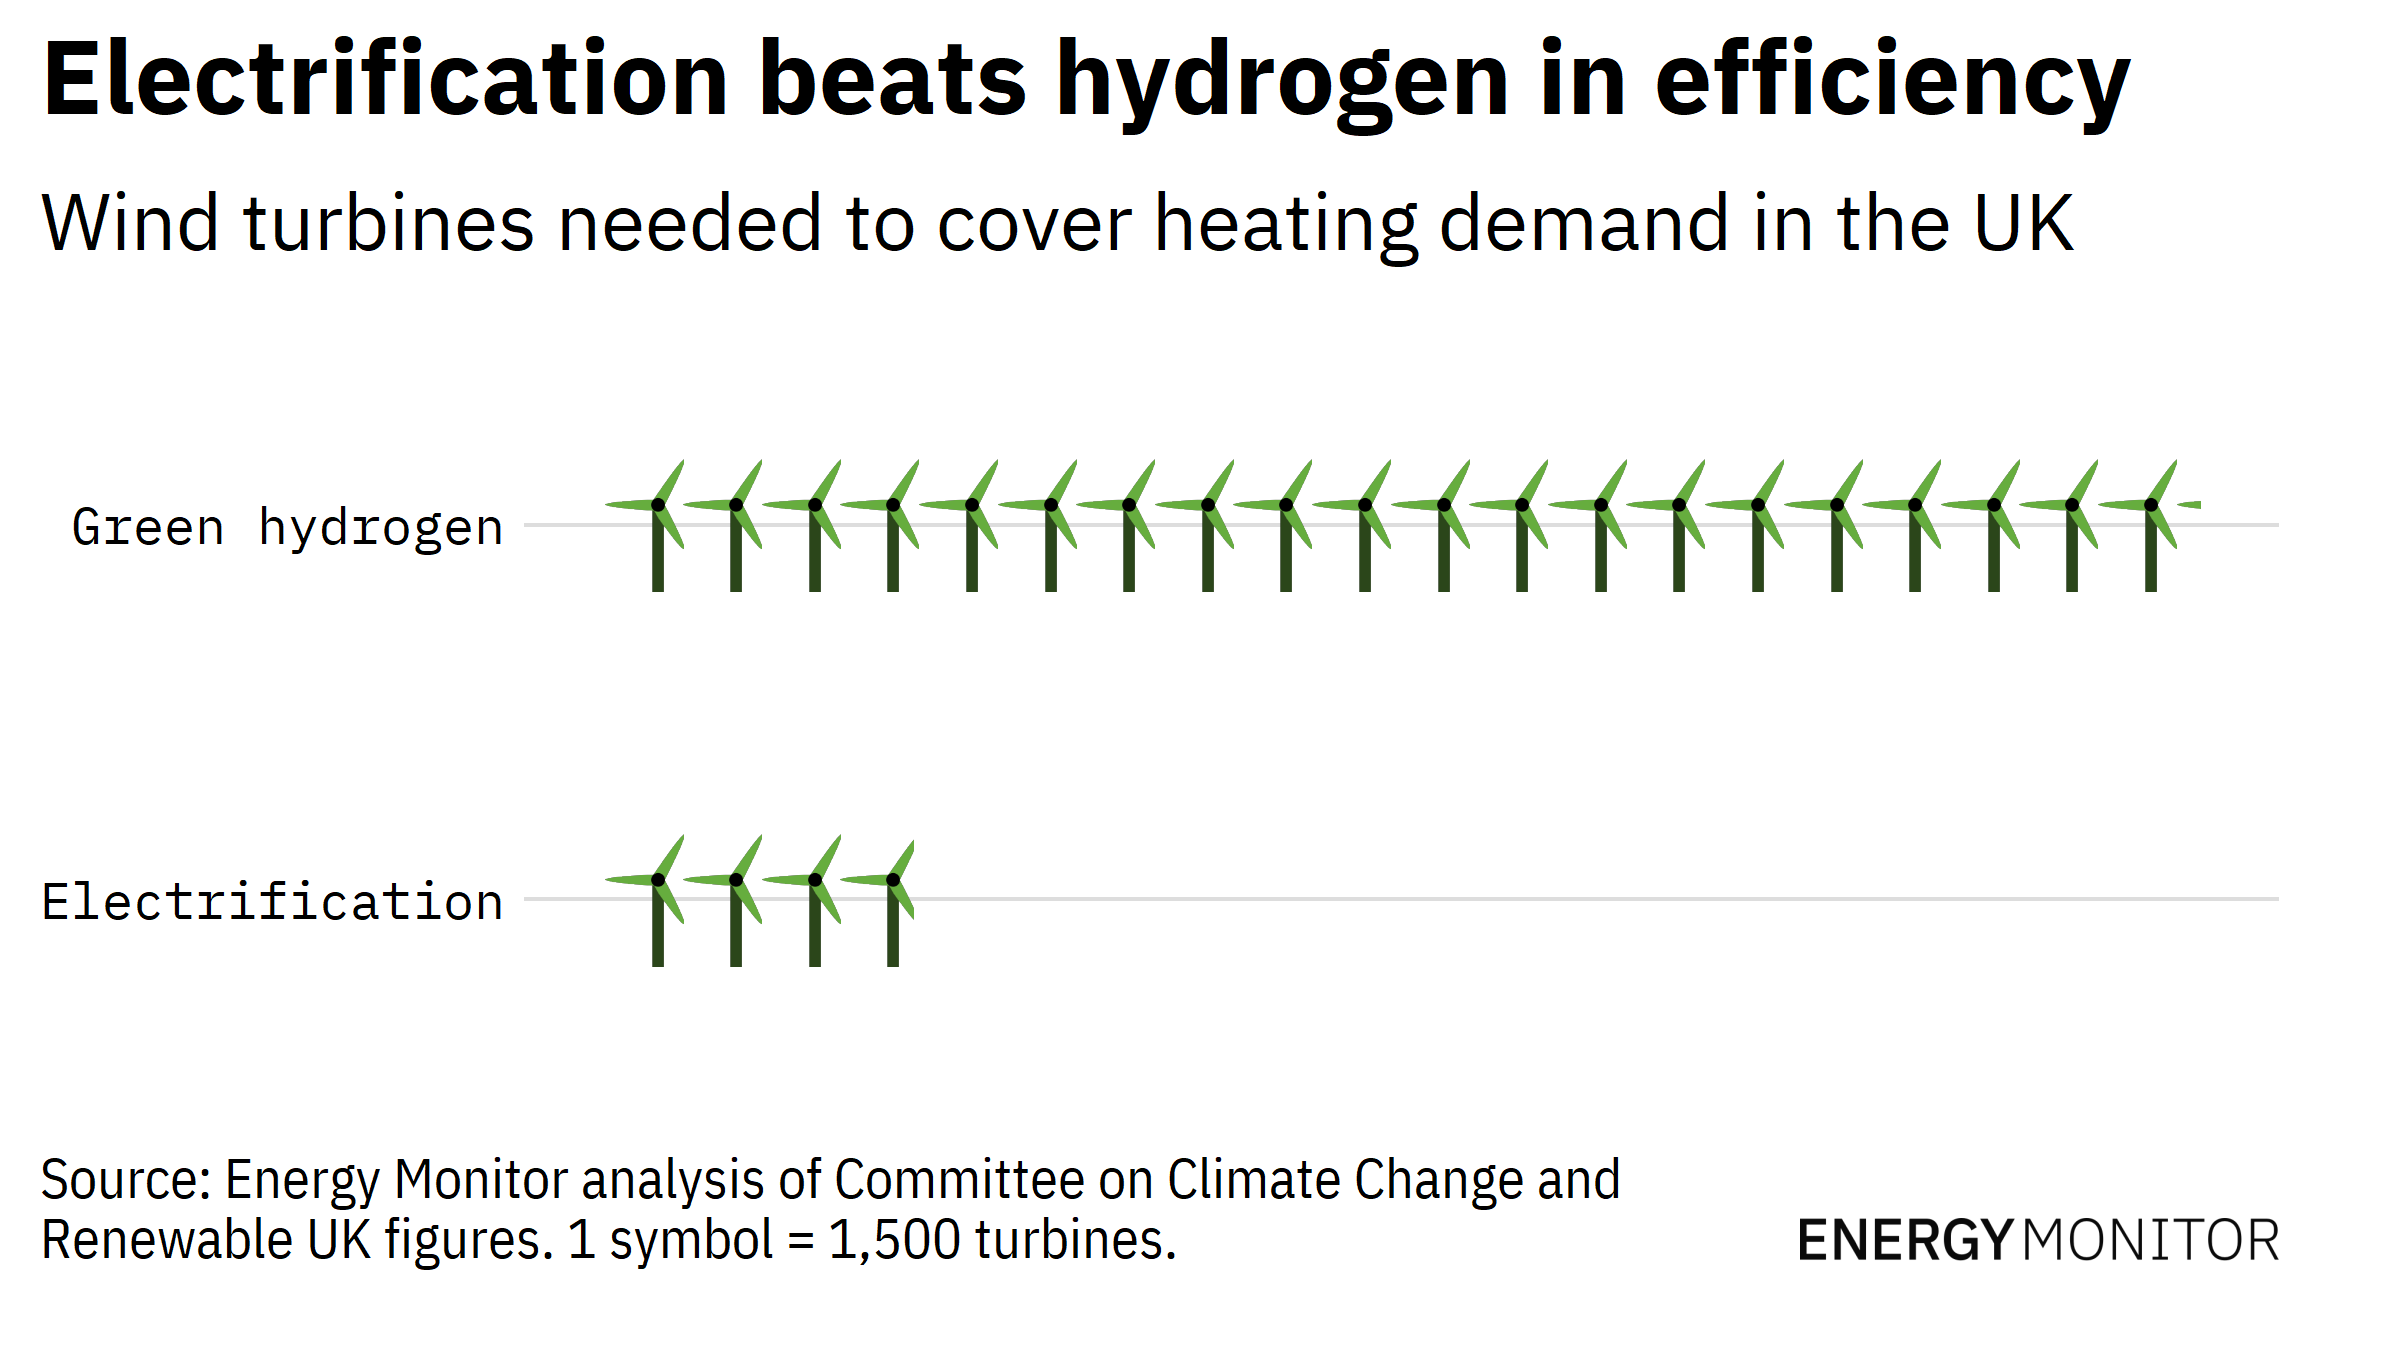 Graphic depicting wind turbines needed for electrification of heating in the UK versus green hydrogen